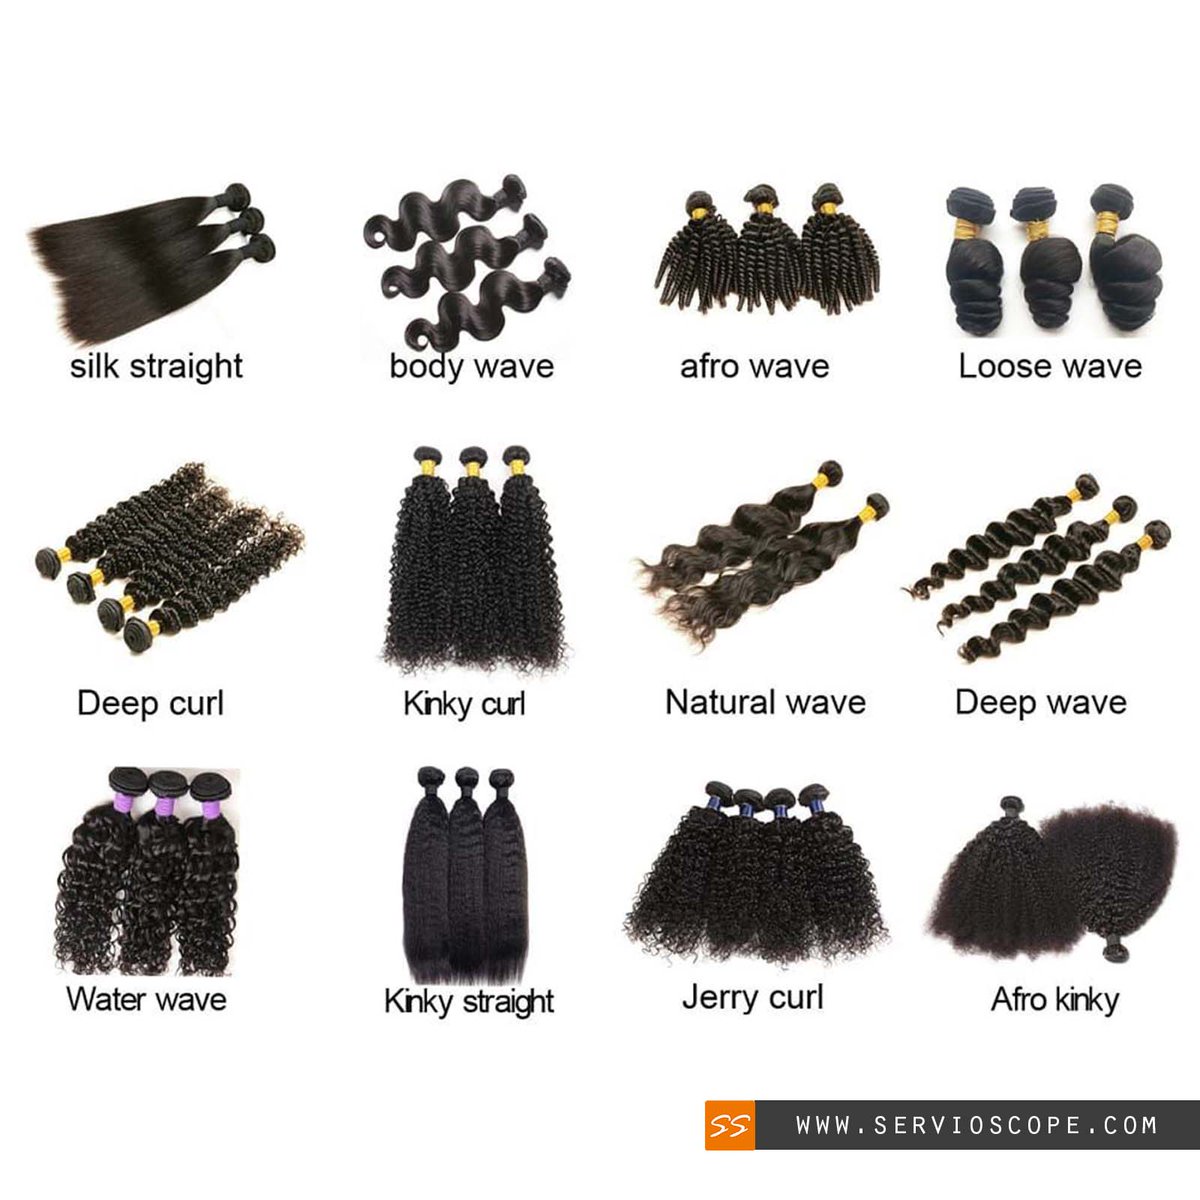 Ami's hair(Niger) retails all kind of hair extensions...human hairs that are durable , attachments ranging from one tone to four tones. 

Find them and other Service Vendors on servioscope.com 

#humanhairweave #humanhairwigs #humanhair #wigs #hairextensions #beauty